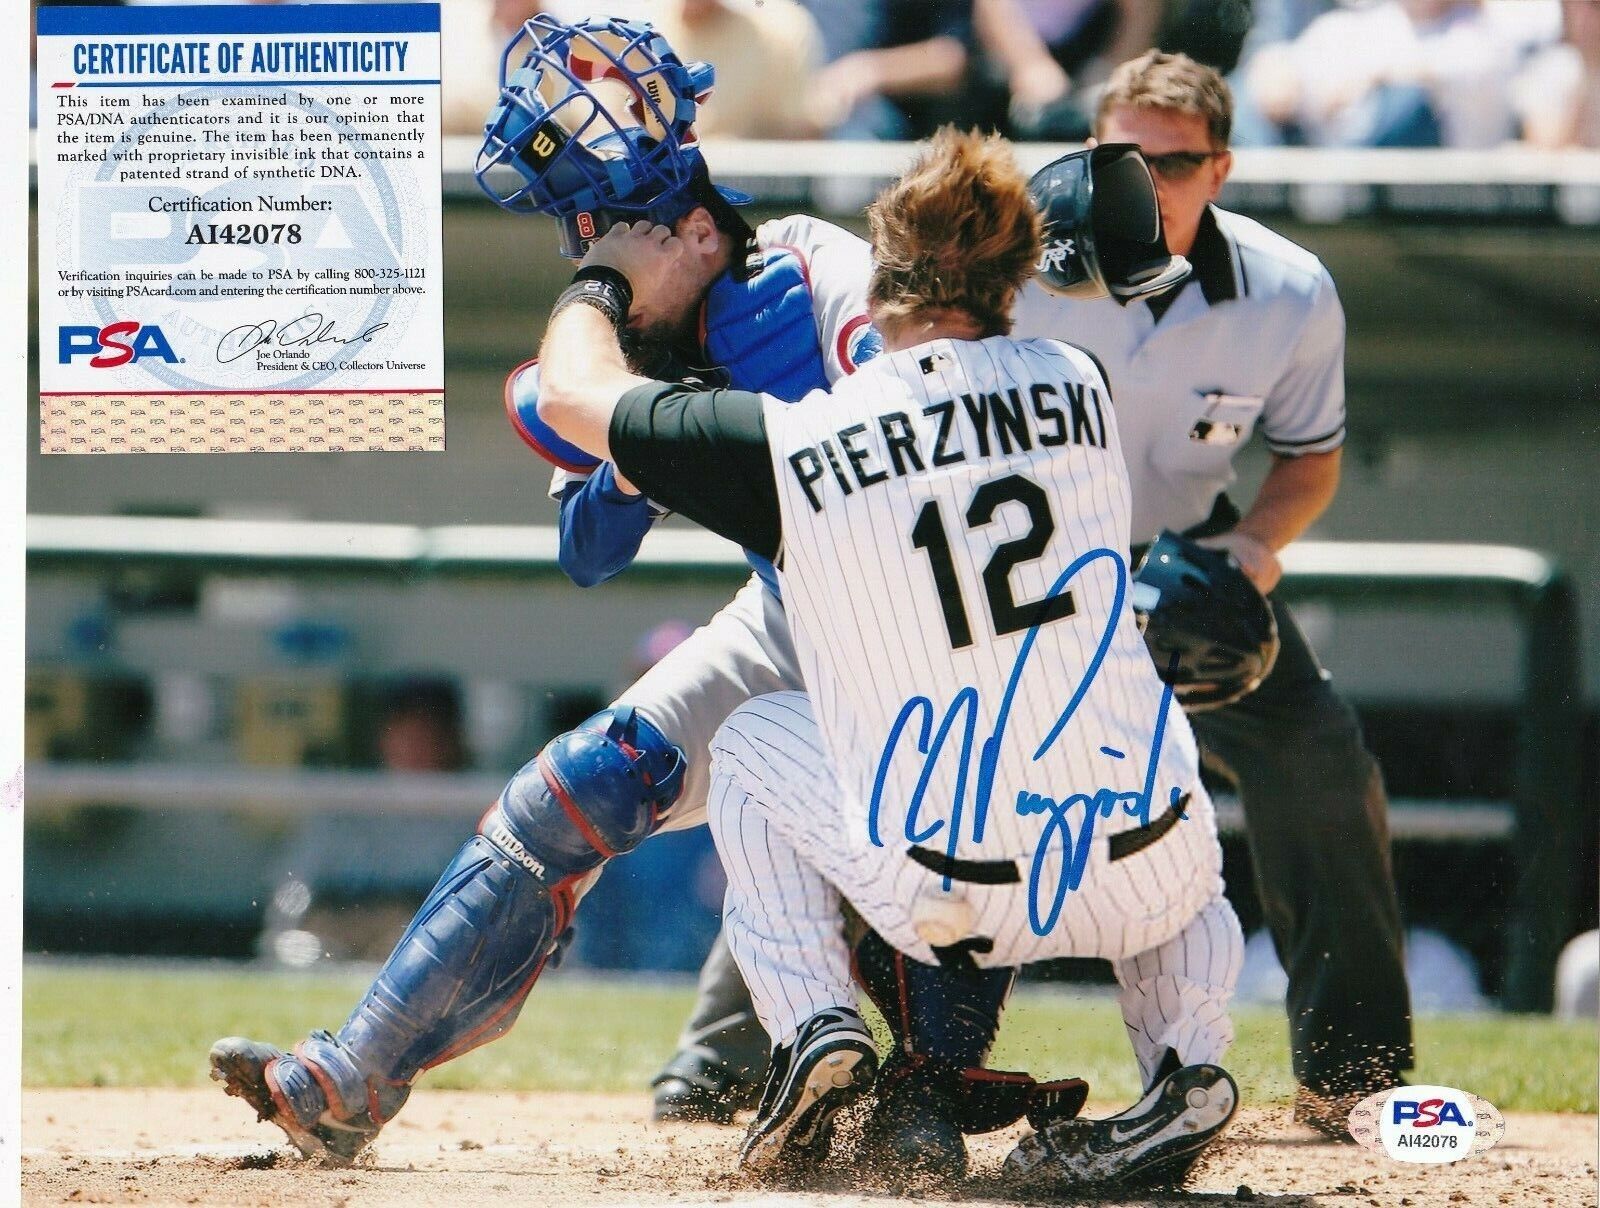 A.J. PIERZYNSKI CHICAGO WHITE SOX PSA AUTHENTICATED ACTION SIGNED 8x10